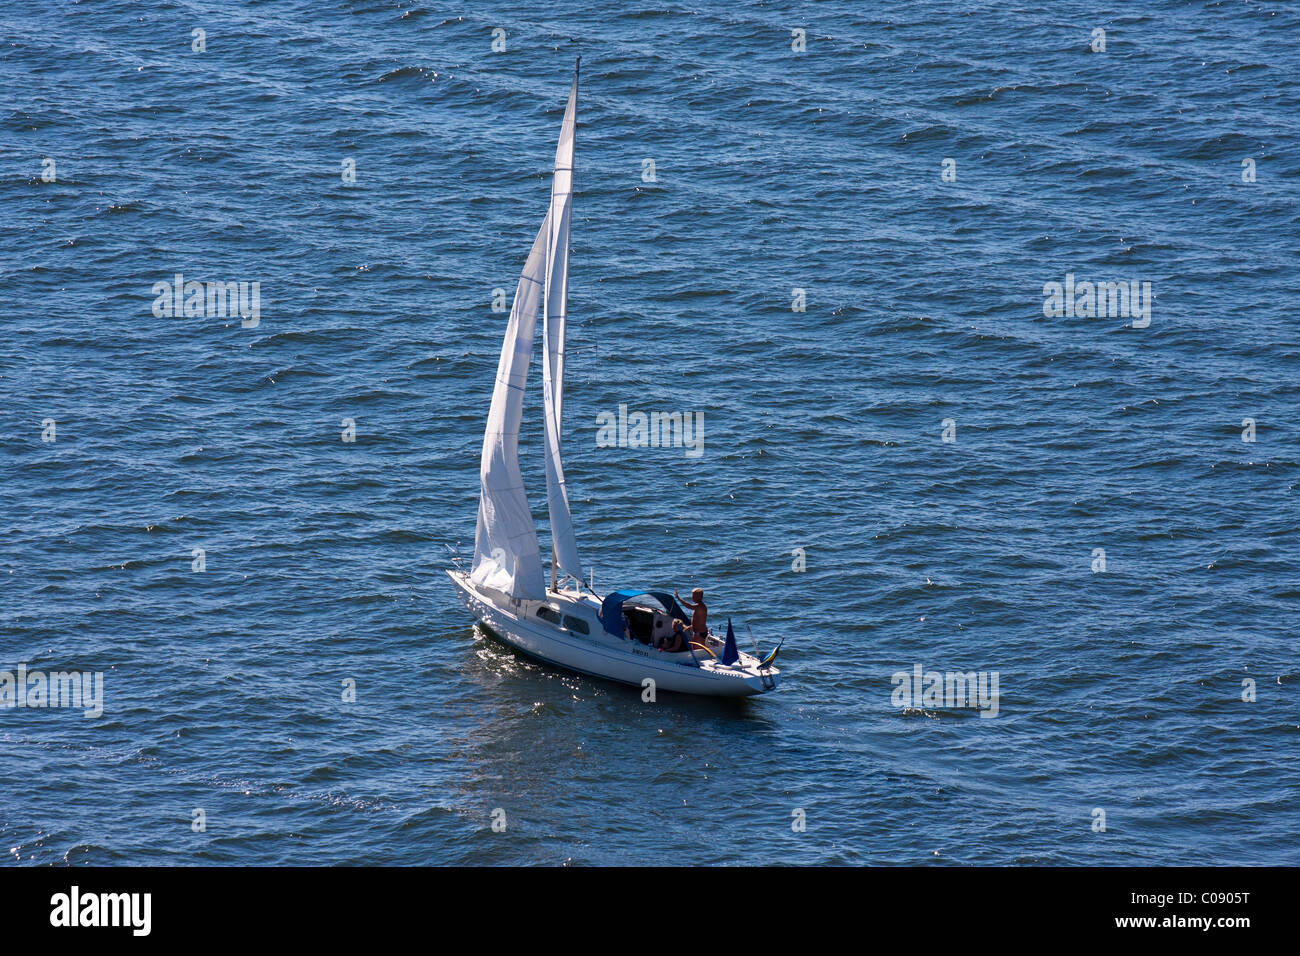 Sailboat in the harbor and archipelago of the city of Stockholm, Sweden. Stock Photo